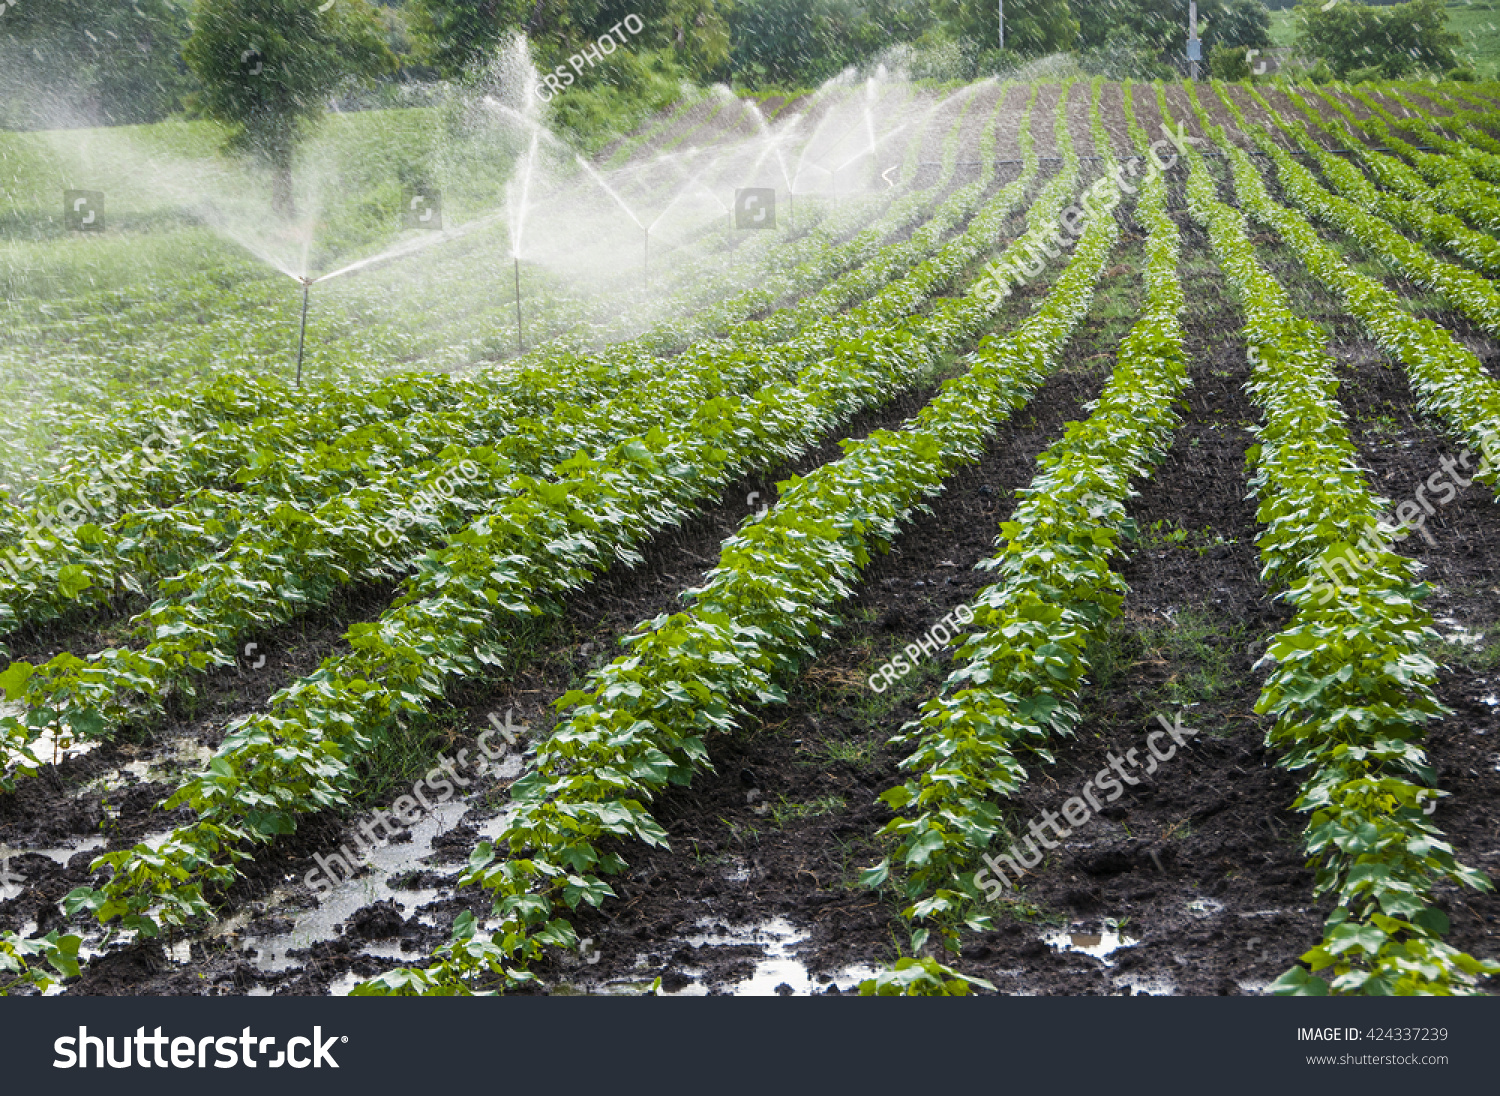 irrigation system in india